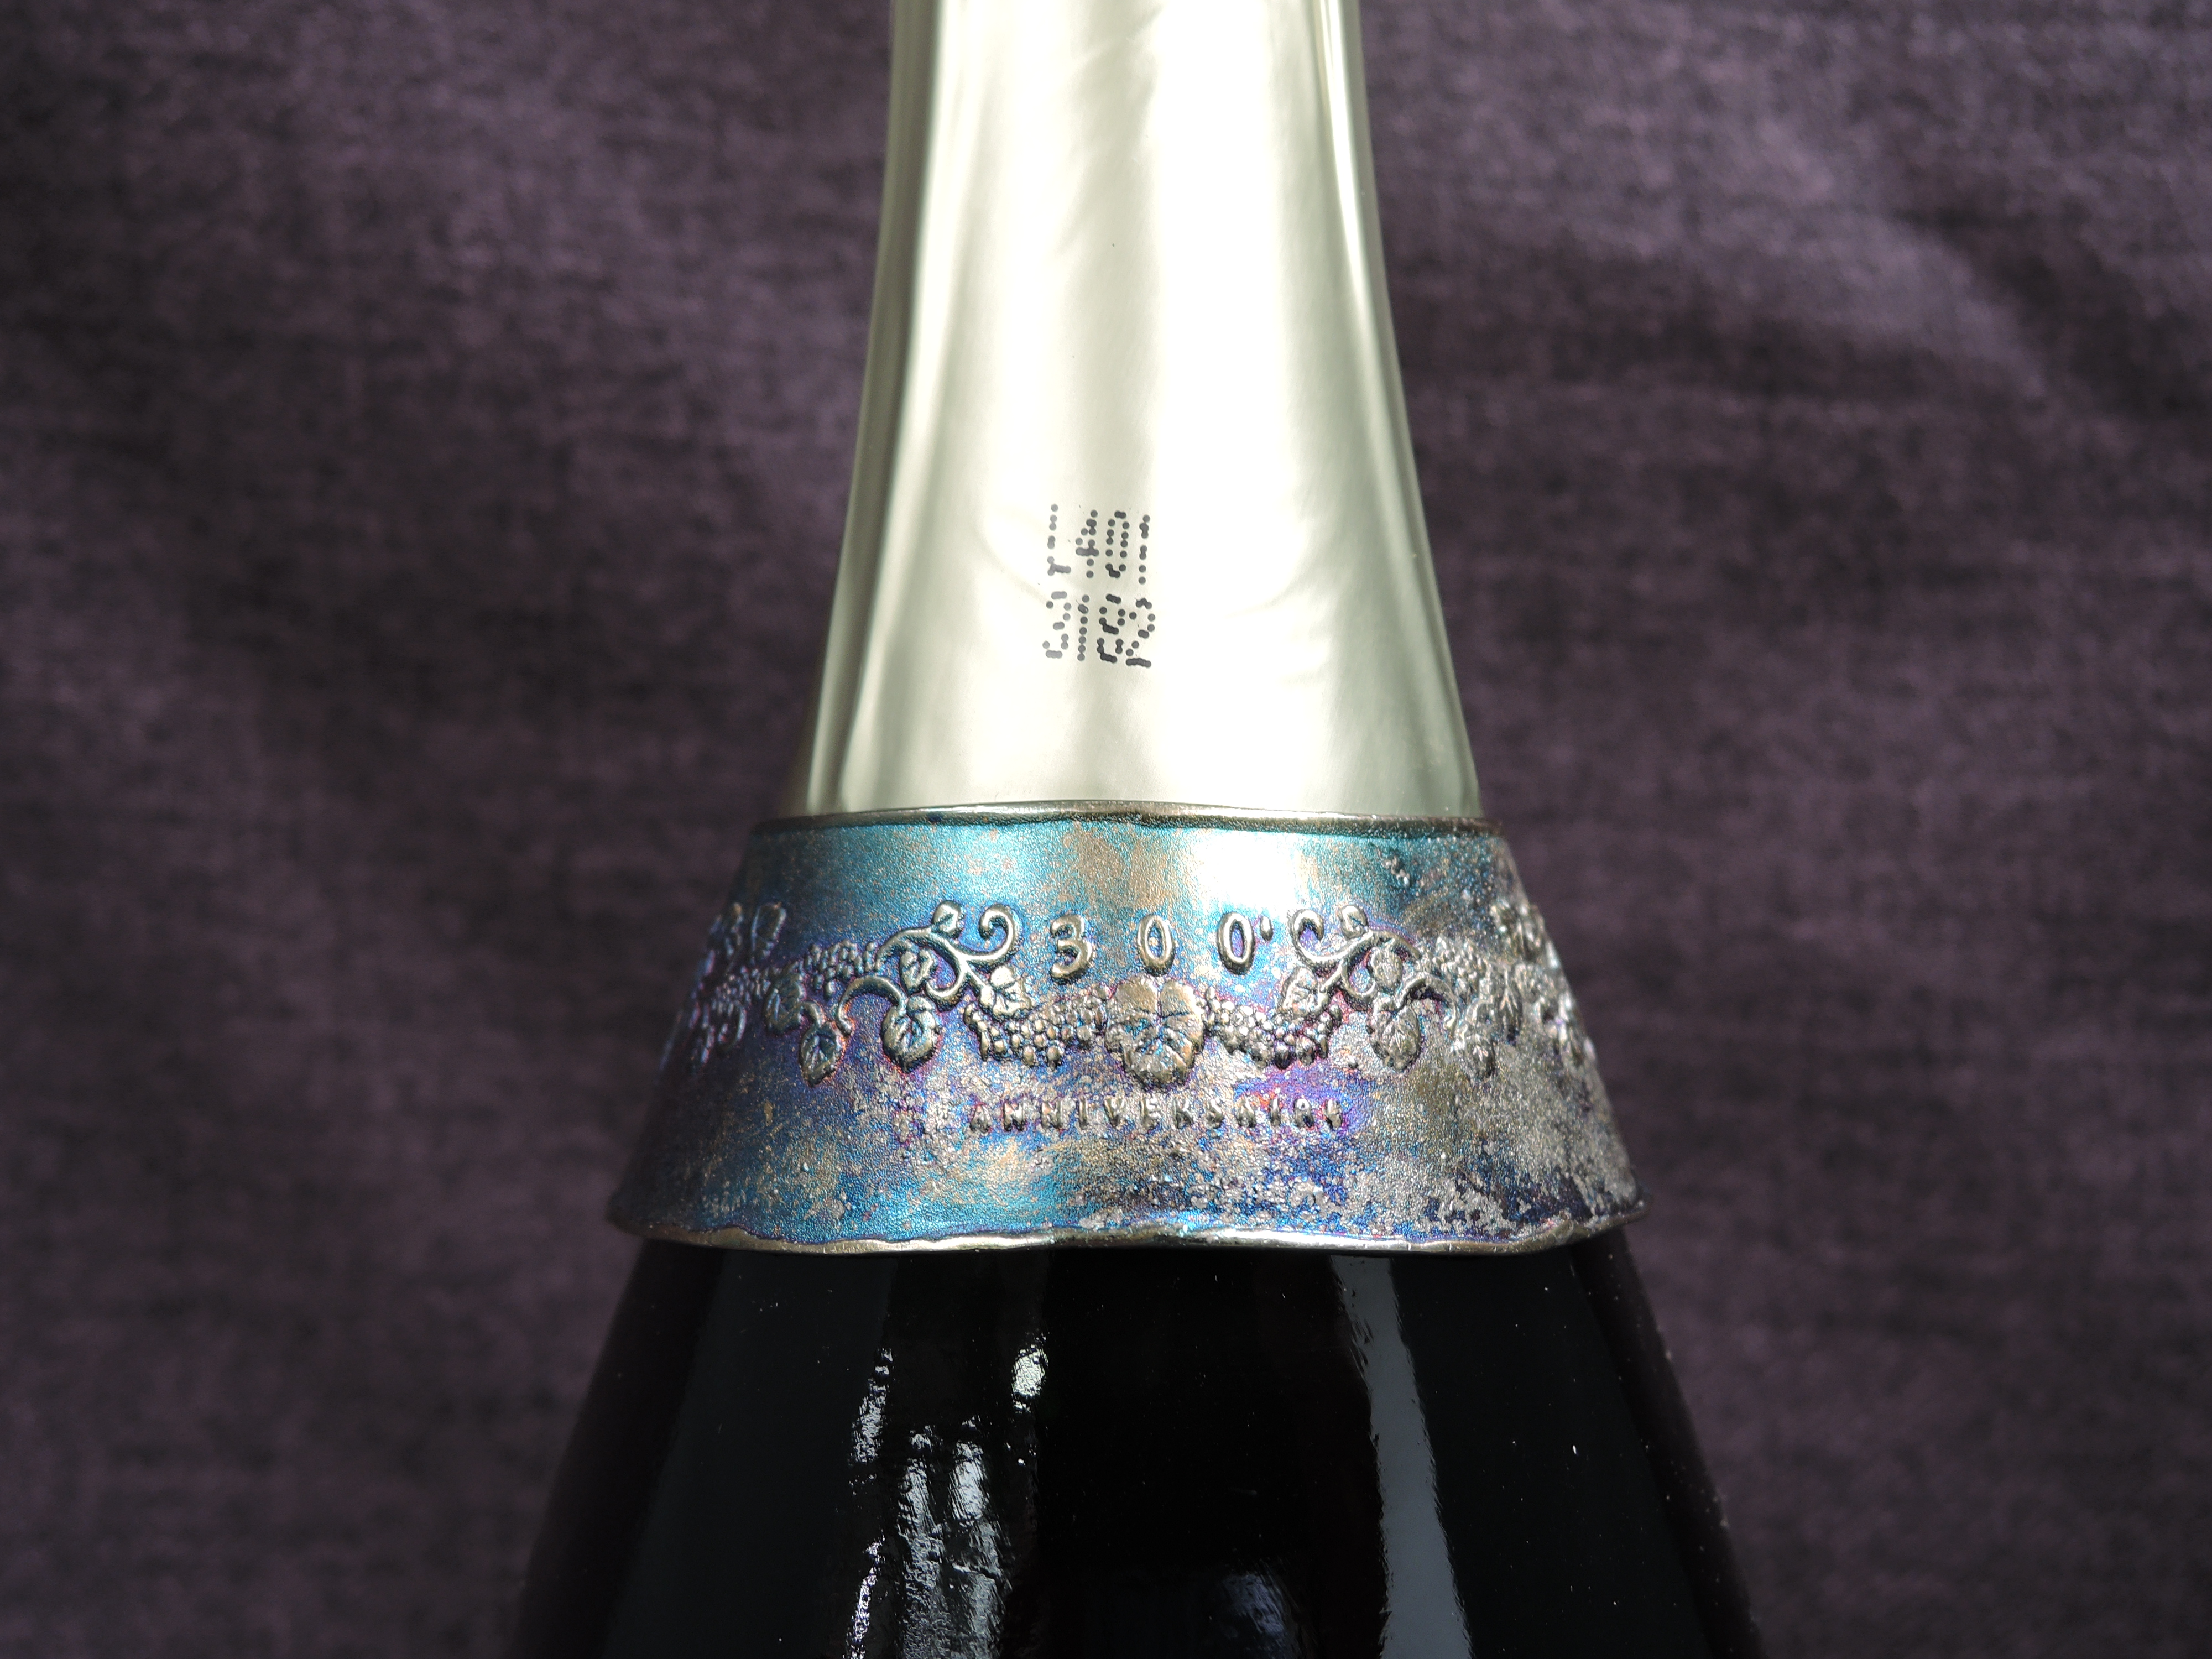 A bottle of Krug Clos Du Mesnil 1989 Champagne, 1698-1998 300 year anniversary, bottle no 07078, 12% - Image 7 of 8